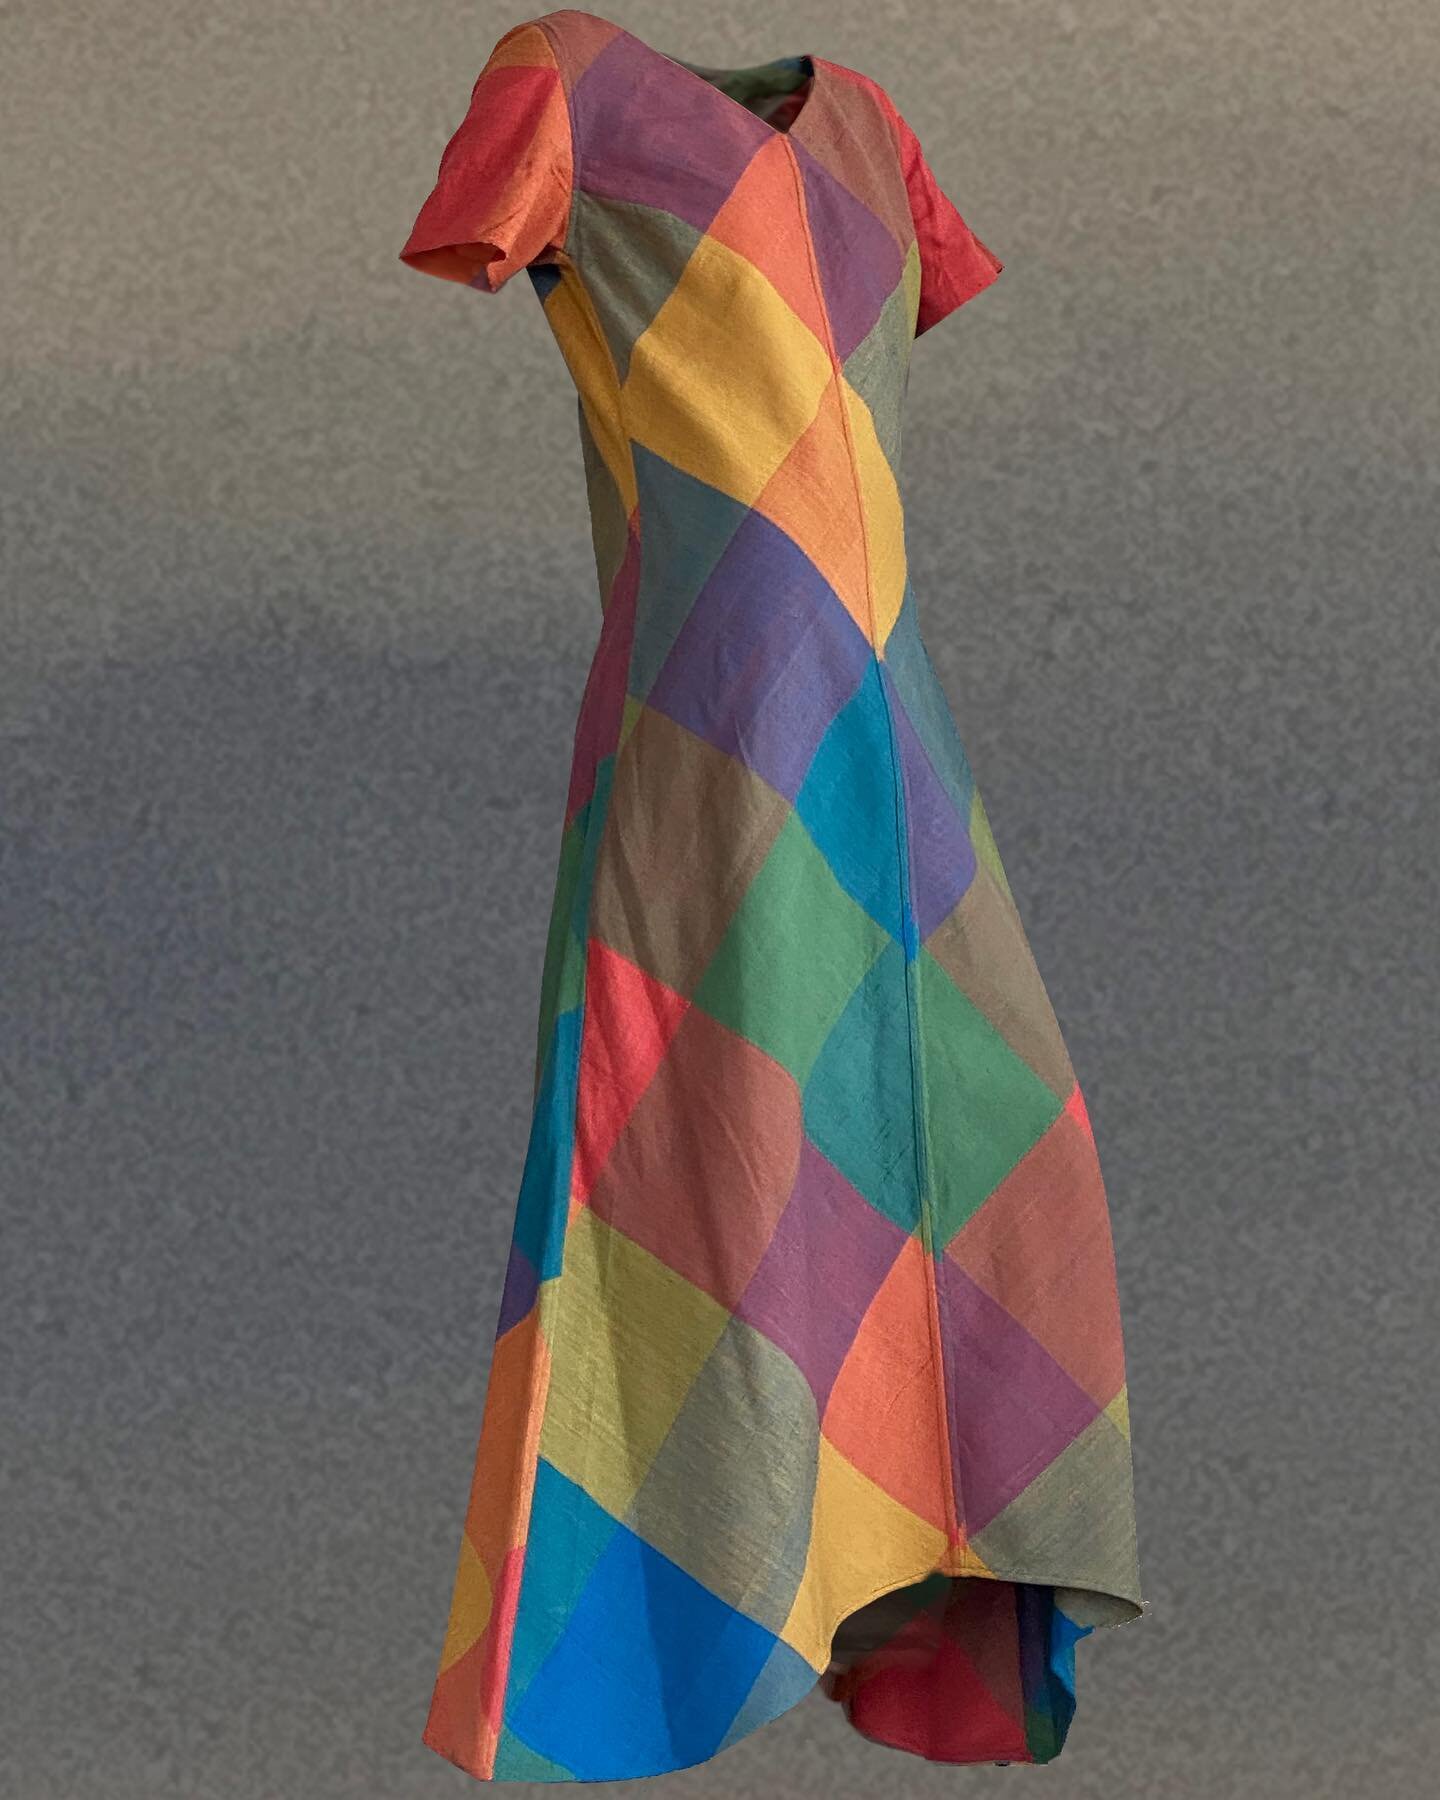 The Lizard Dress in Sunset Windows
Available @thecanvasnyc @oculusnyc or on our website, made to measure for you at Xoomba.com

Why is it called the lizard dress? 
The first lizard dress really did have a lizard look with copper and orange stripes. T